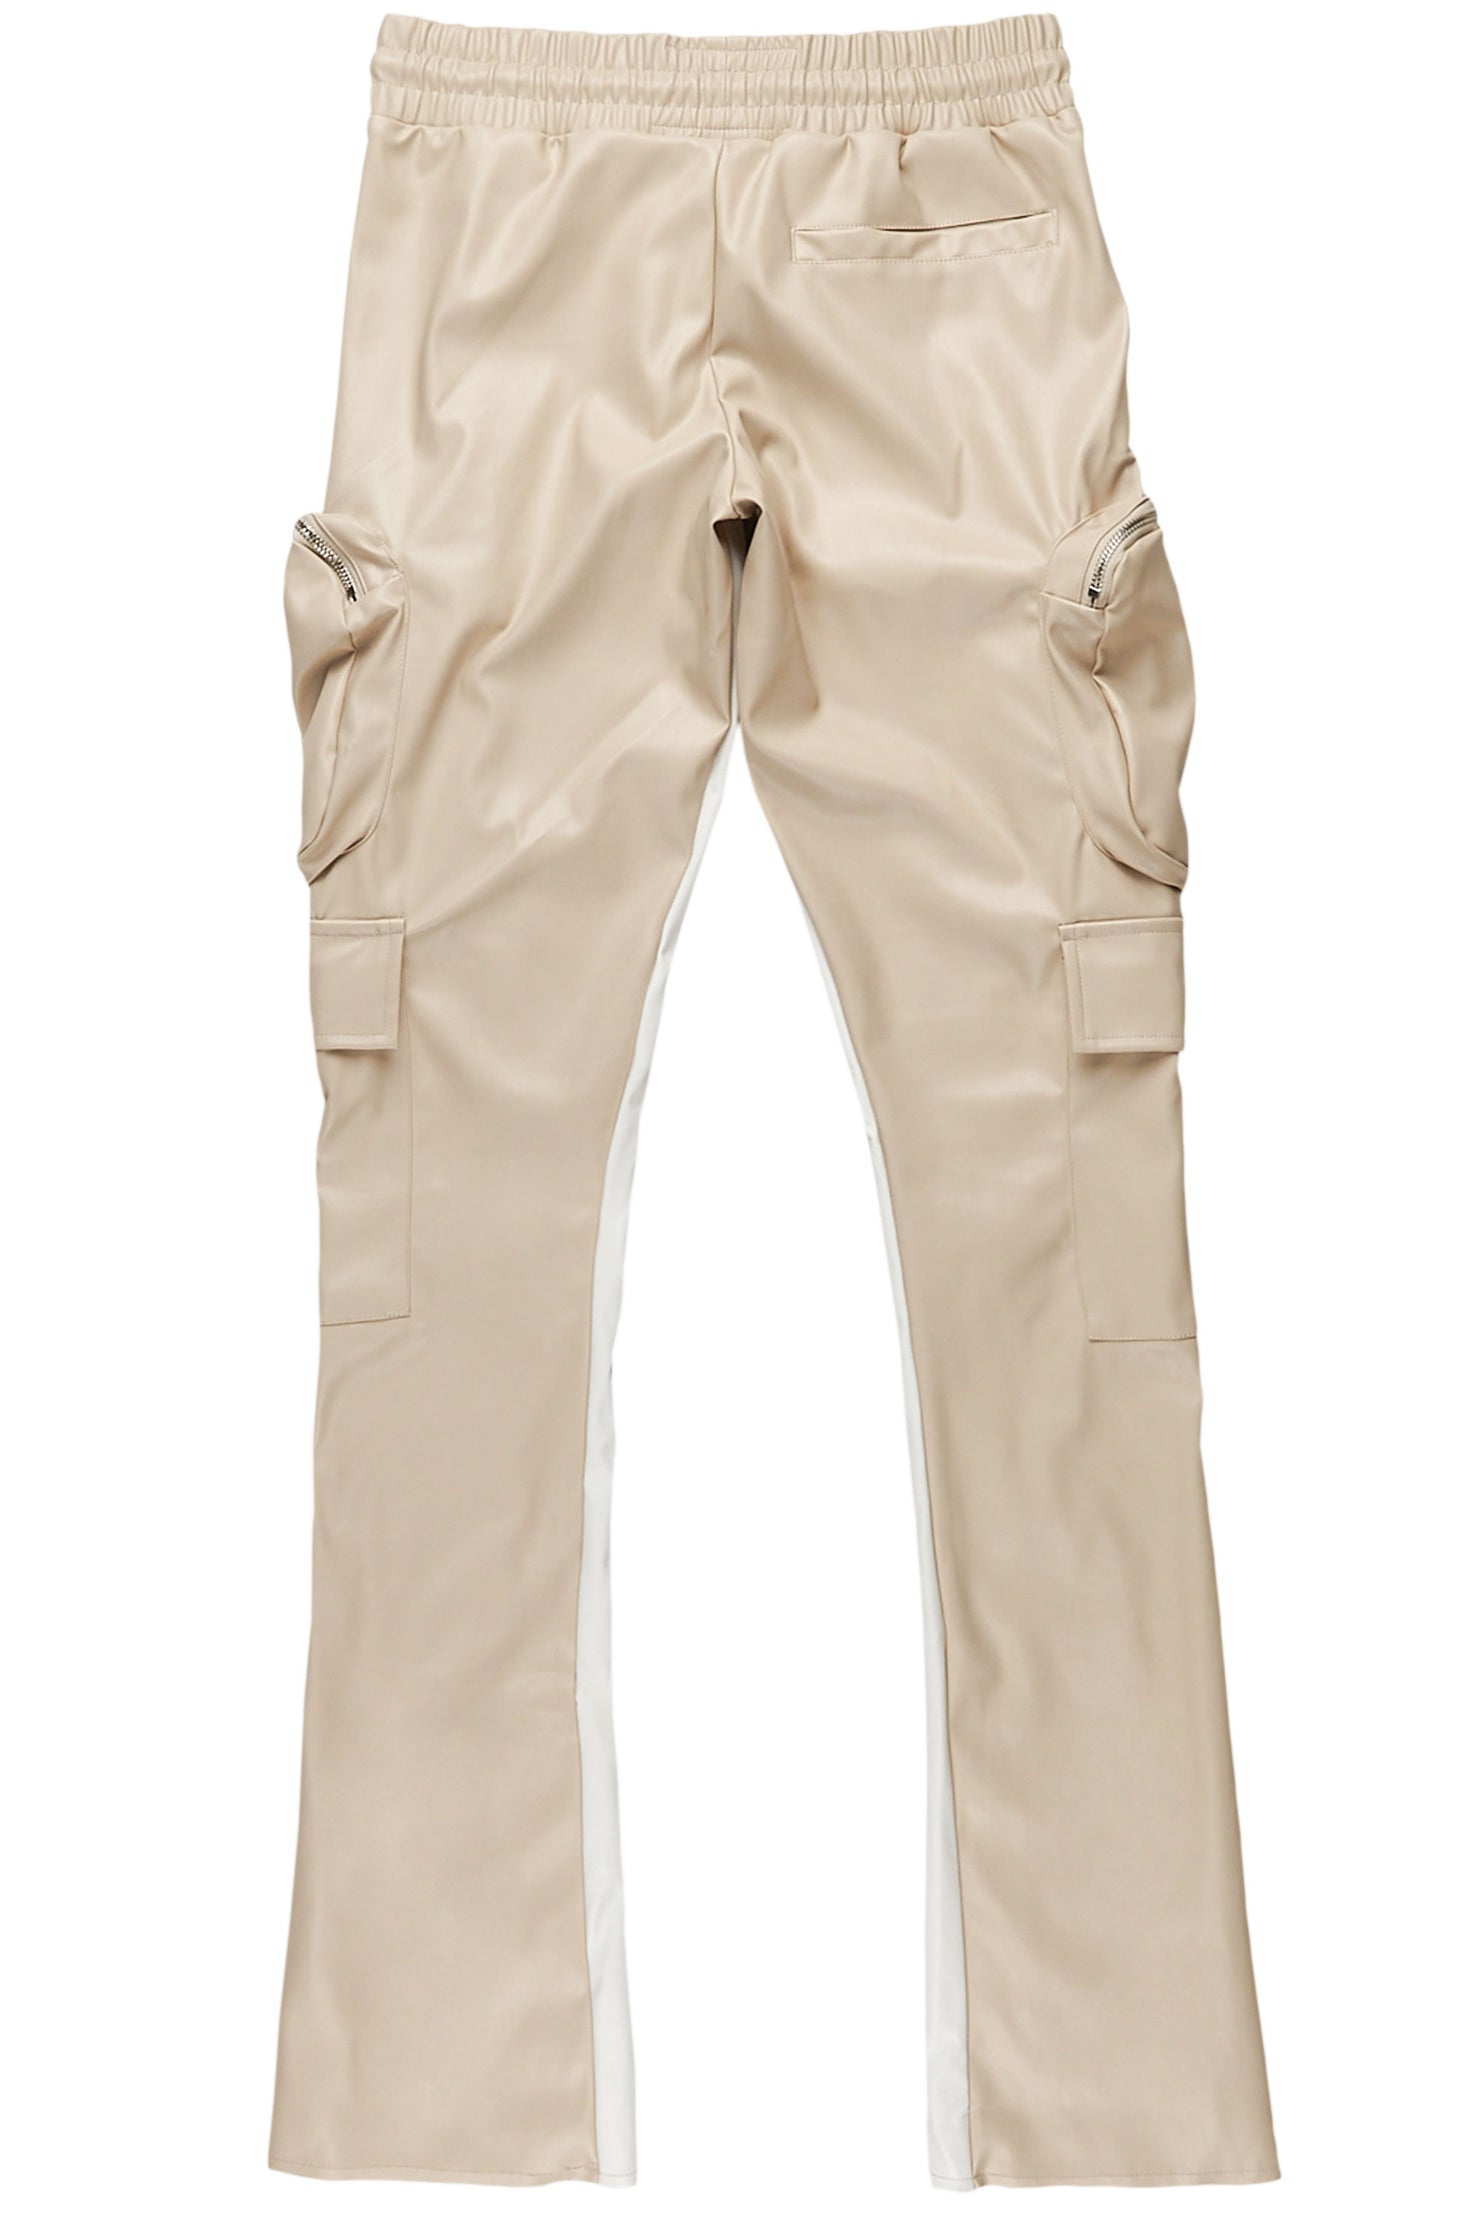 Lawson Beige/White Stacked Flare Pants